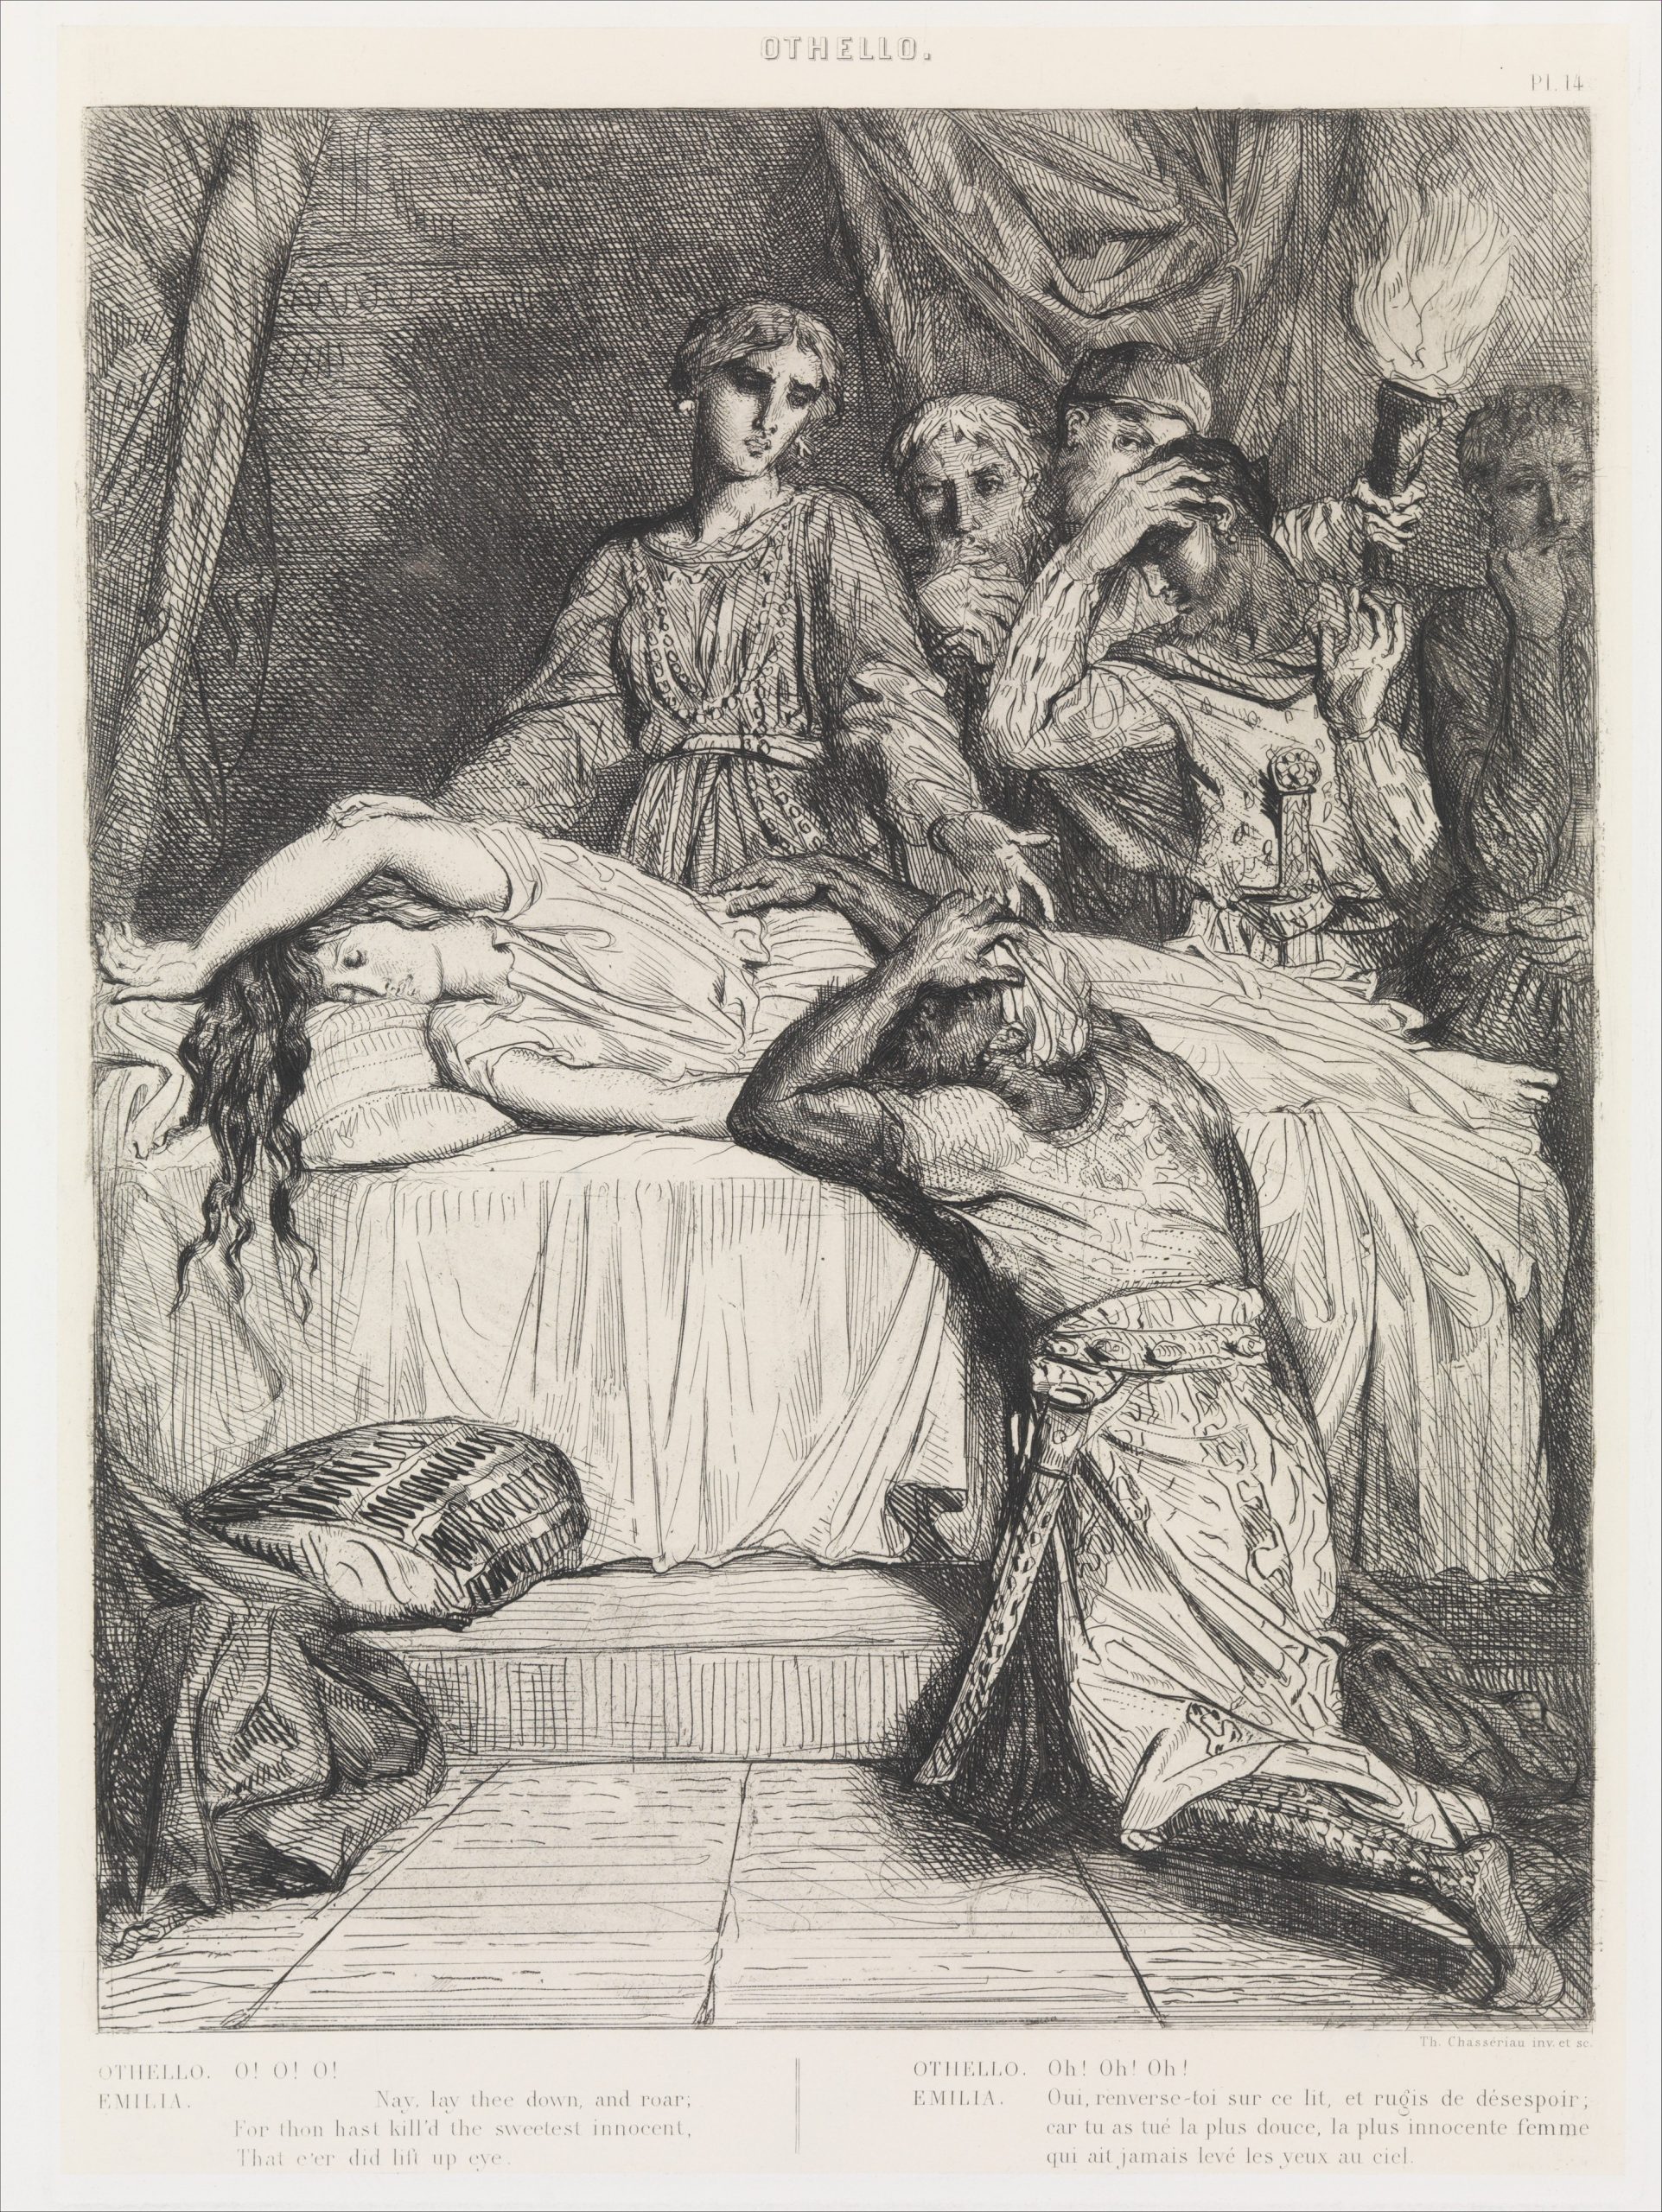 An illustration depicts a woman who lies down with several people surrounding her.